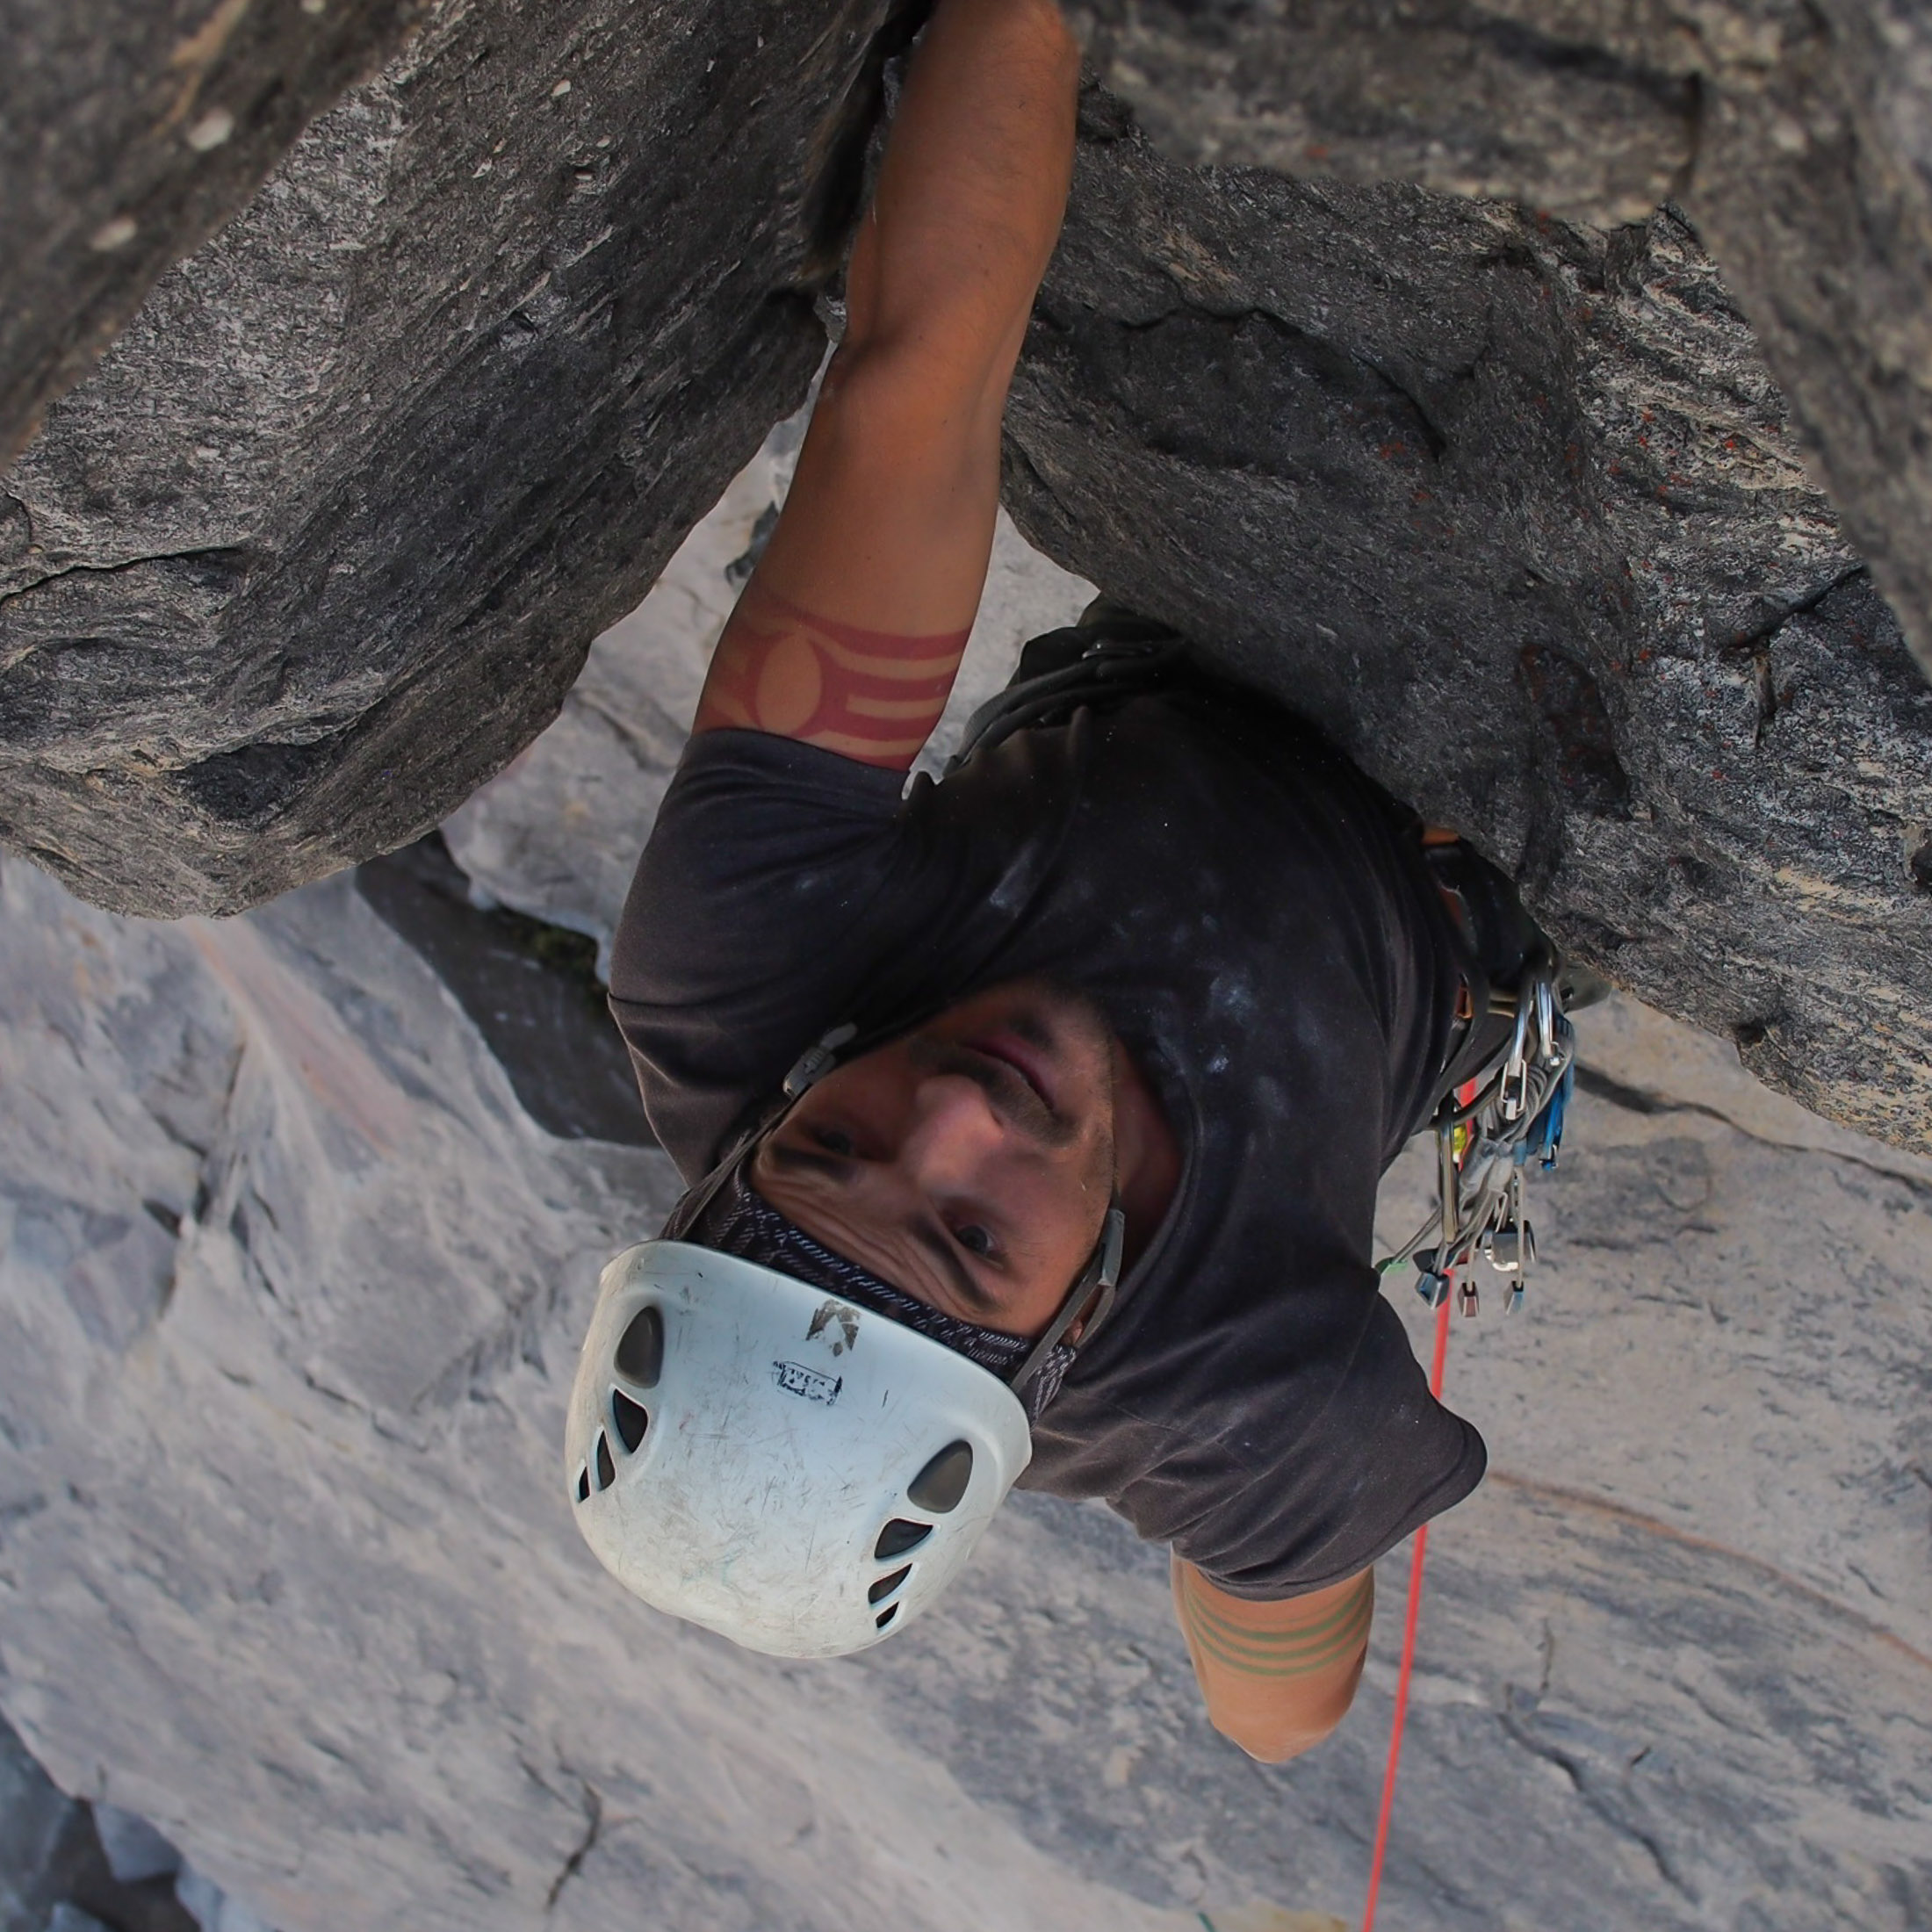 climber looking relaxed through crux section